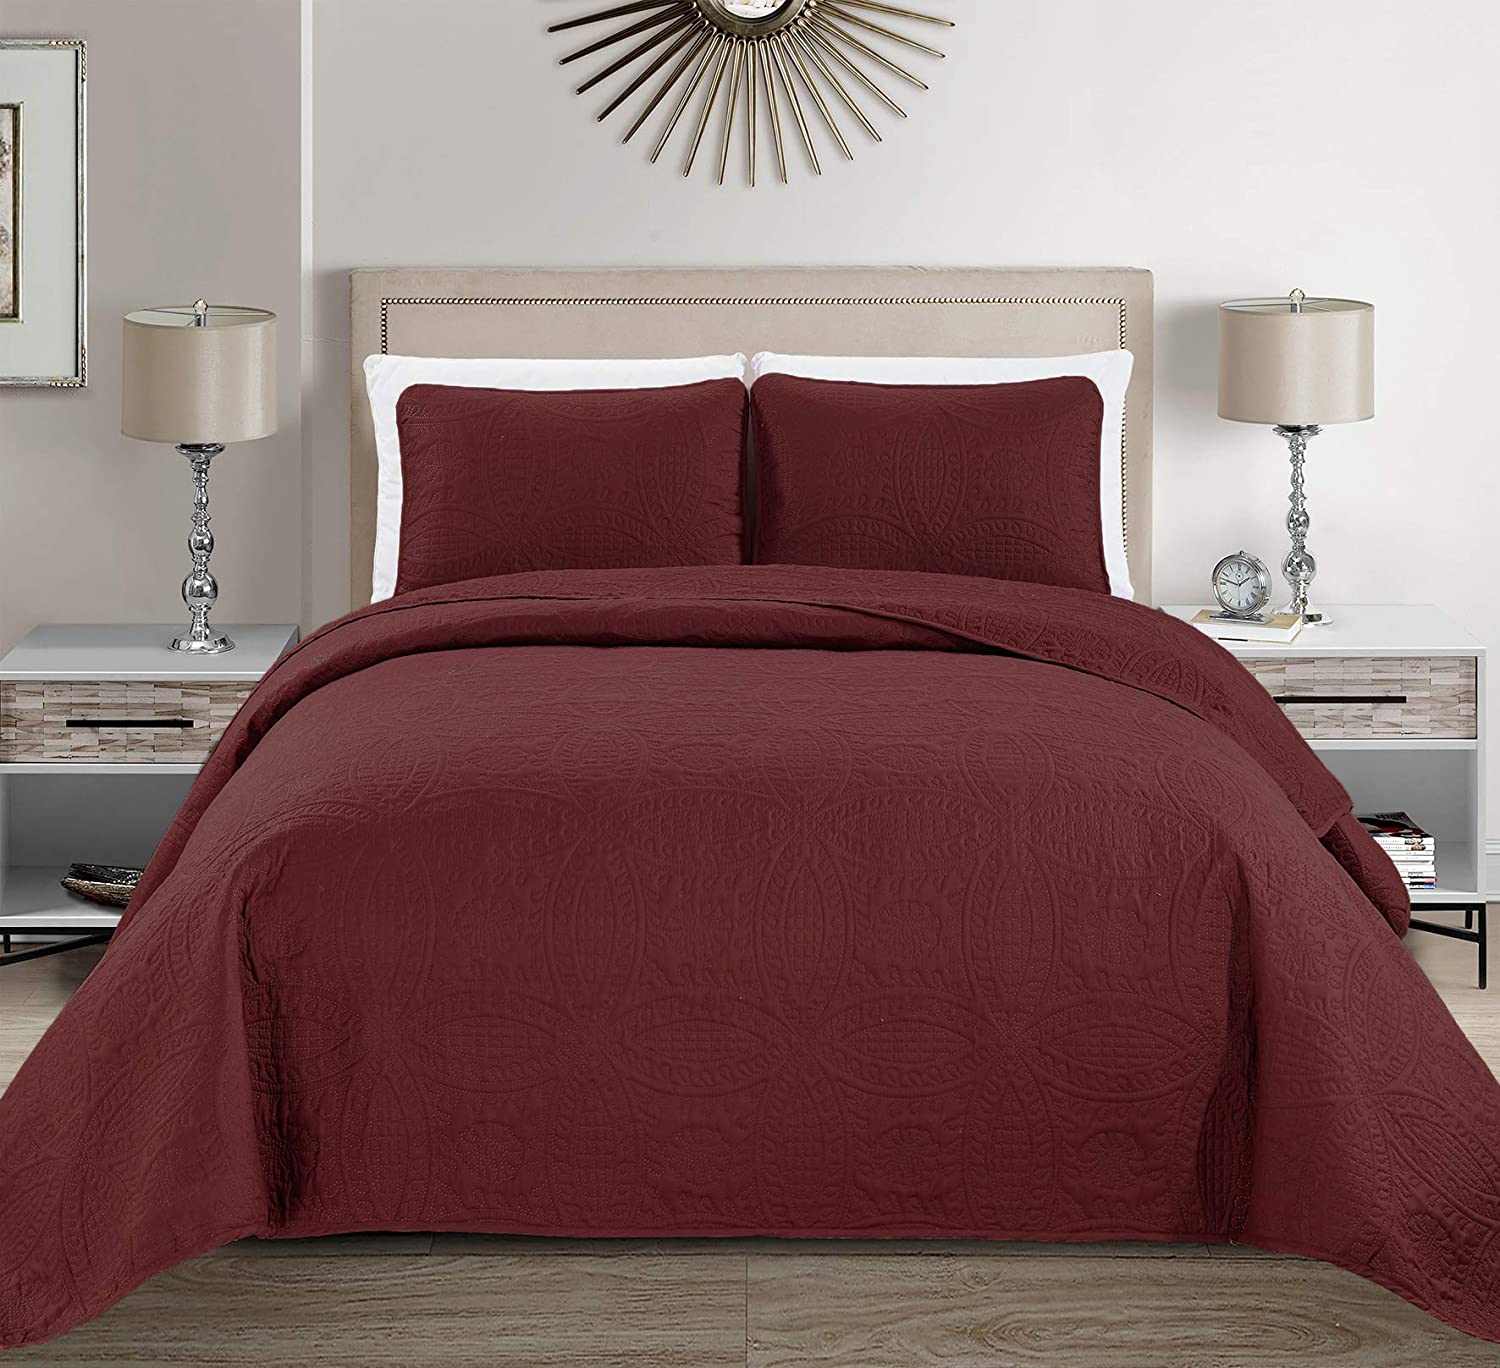 Details about   Mk Collection 3pc King/California King Solid Embossed Bedspread Bed Cover Over S 